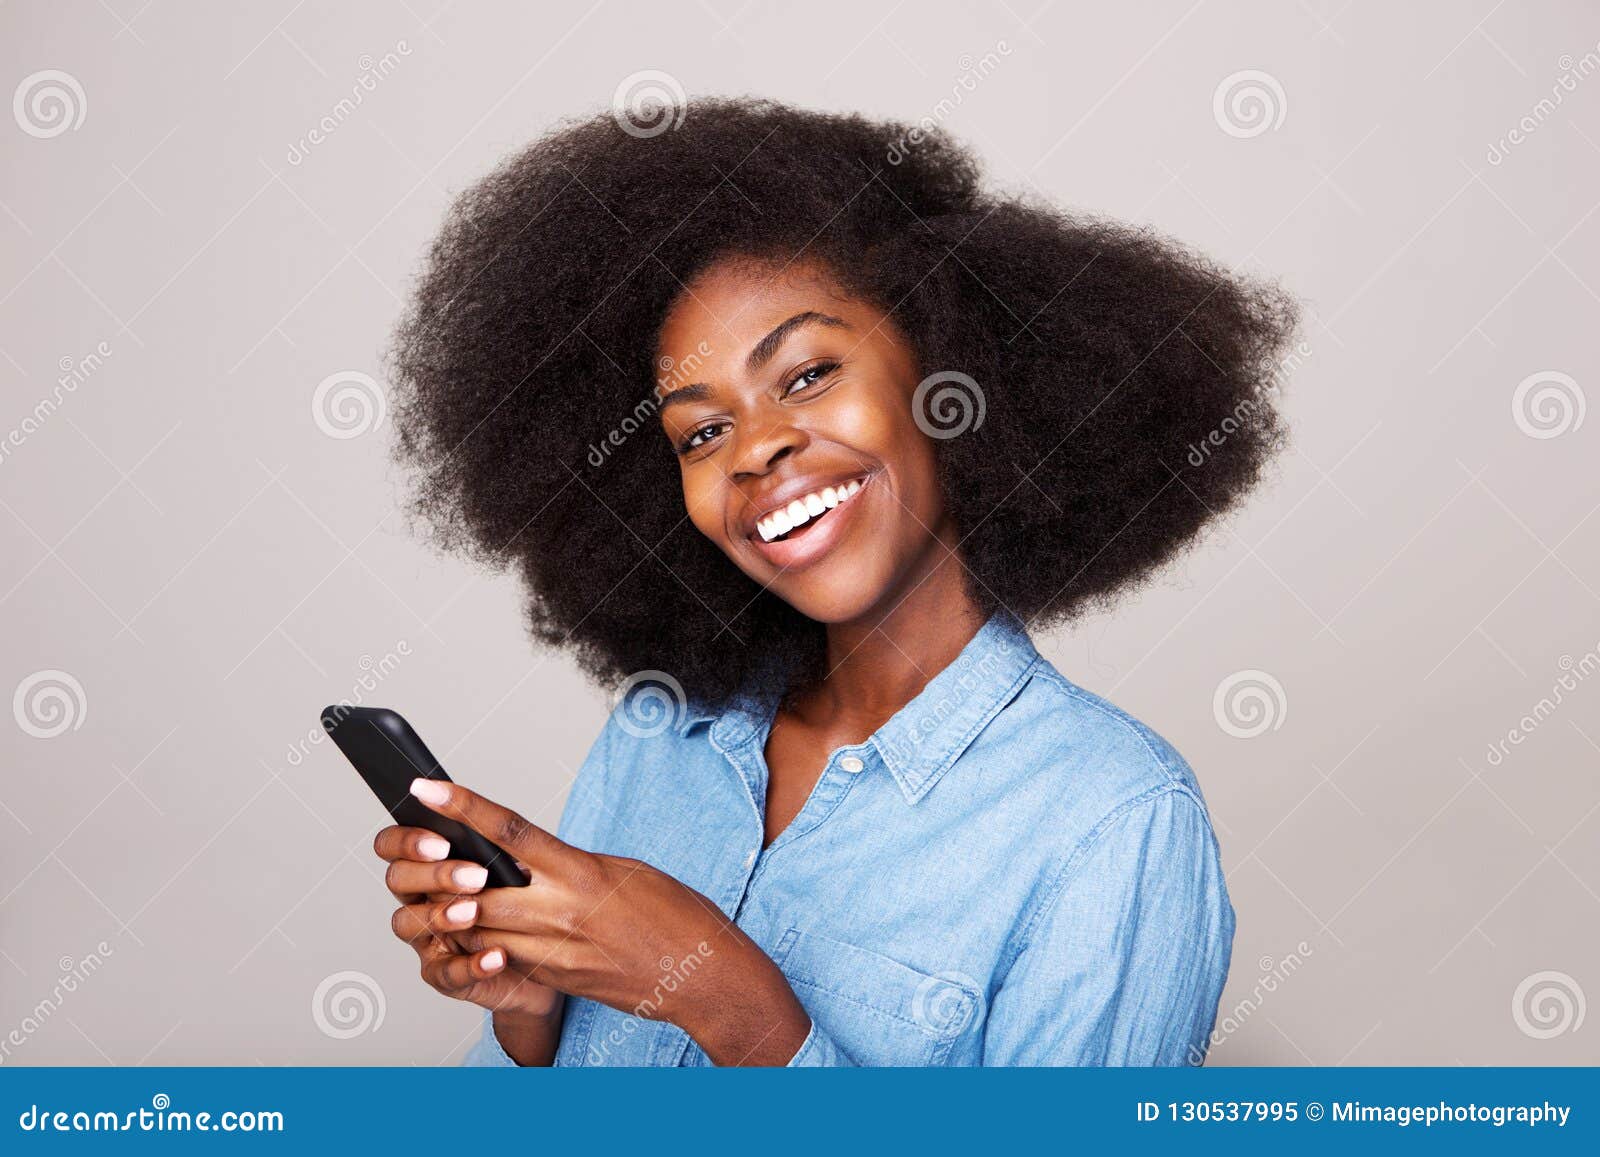 close up portrait of happy young african american woman smiling with mobile phone